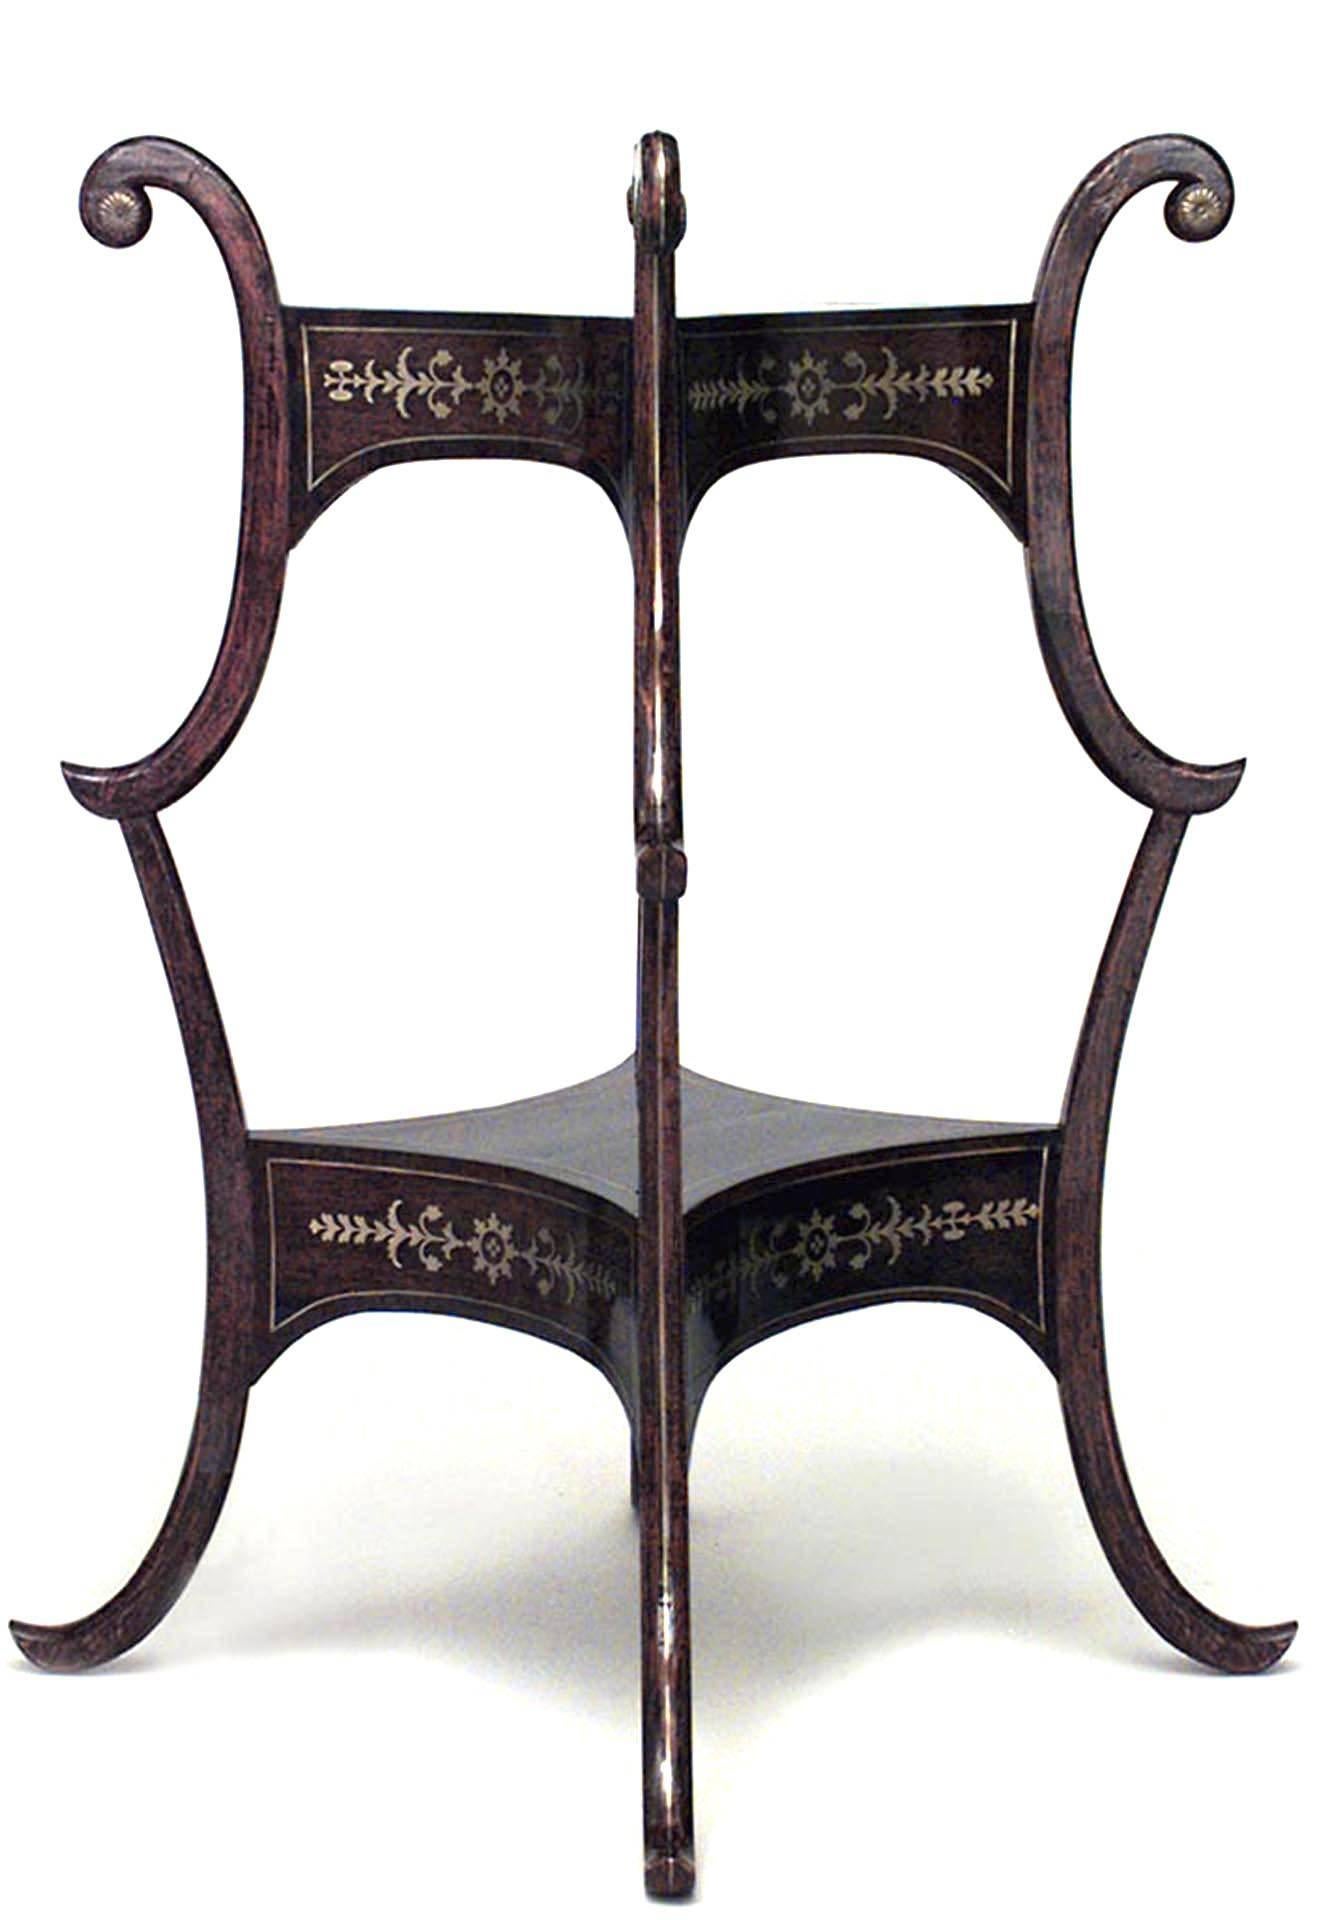 English Regency-style (19th Century) rosewood and brass inlaid end table with scroll design legs and square shaped top and shelf.
